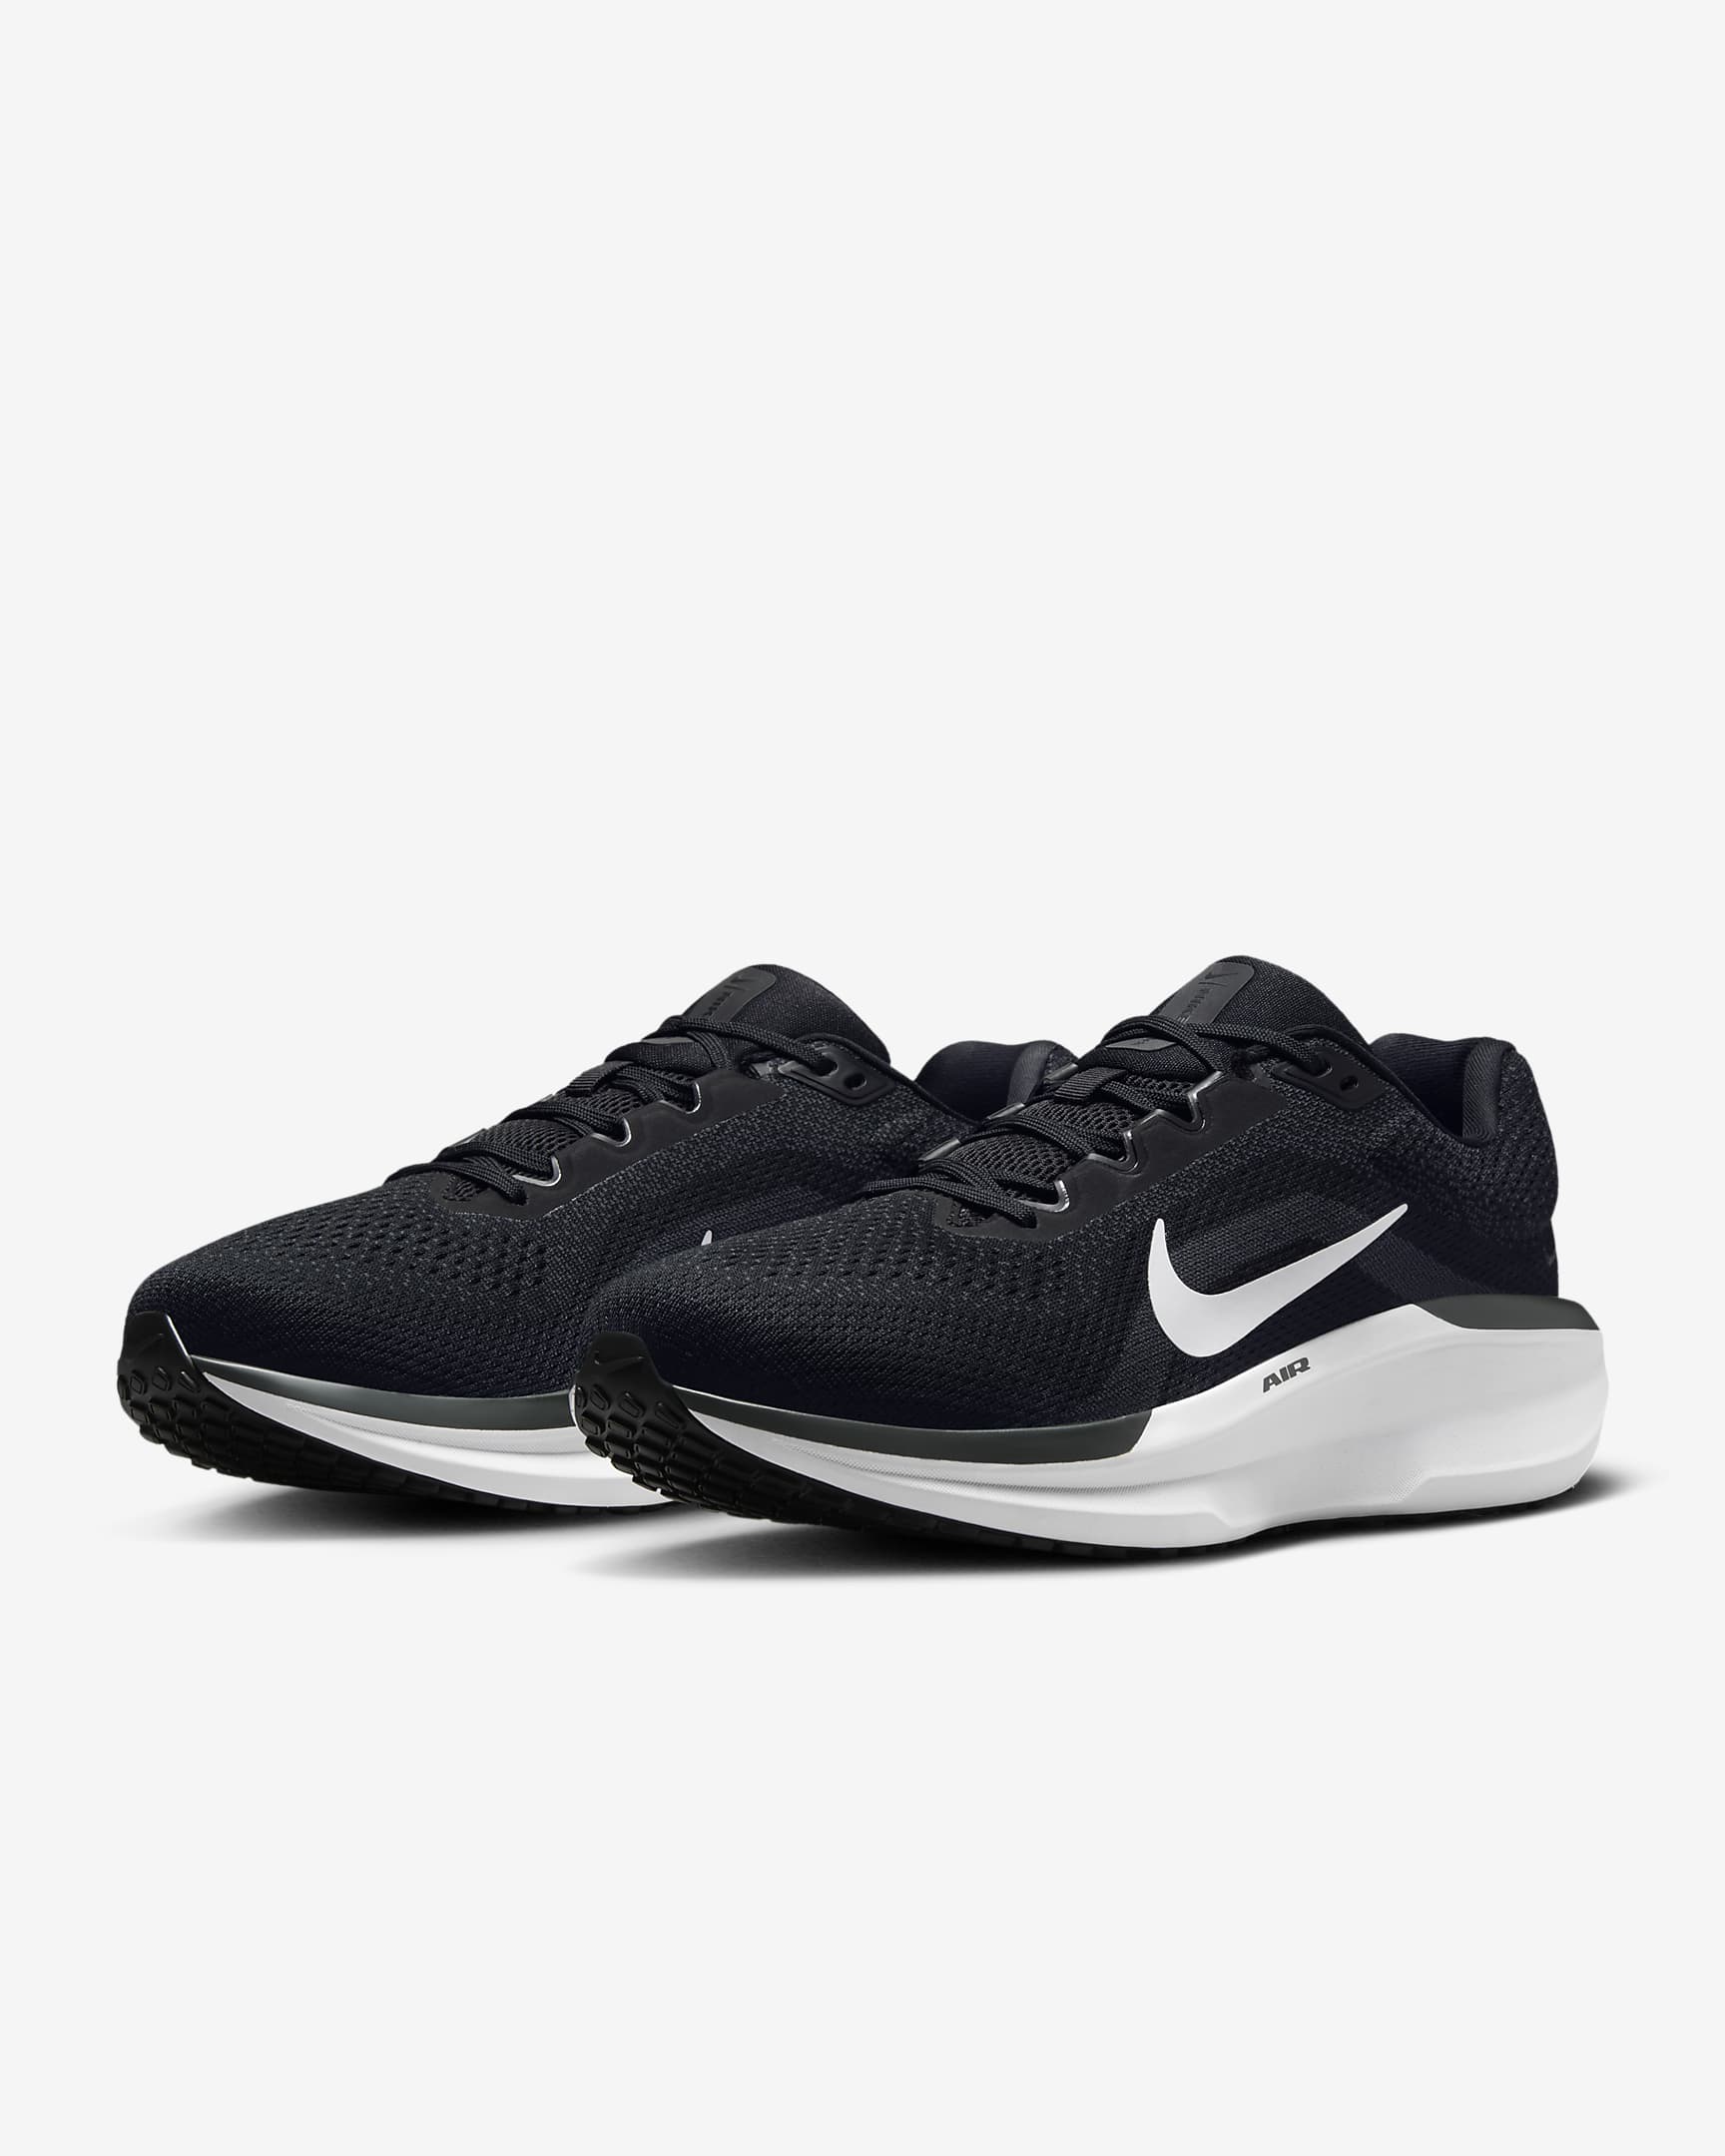 Nike Winflo 11 Men's Road Running Shoes (Extra Wide) - Black/Anthracite/Cool Grey/White